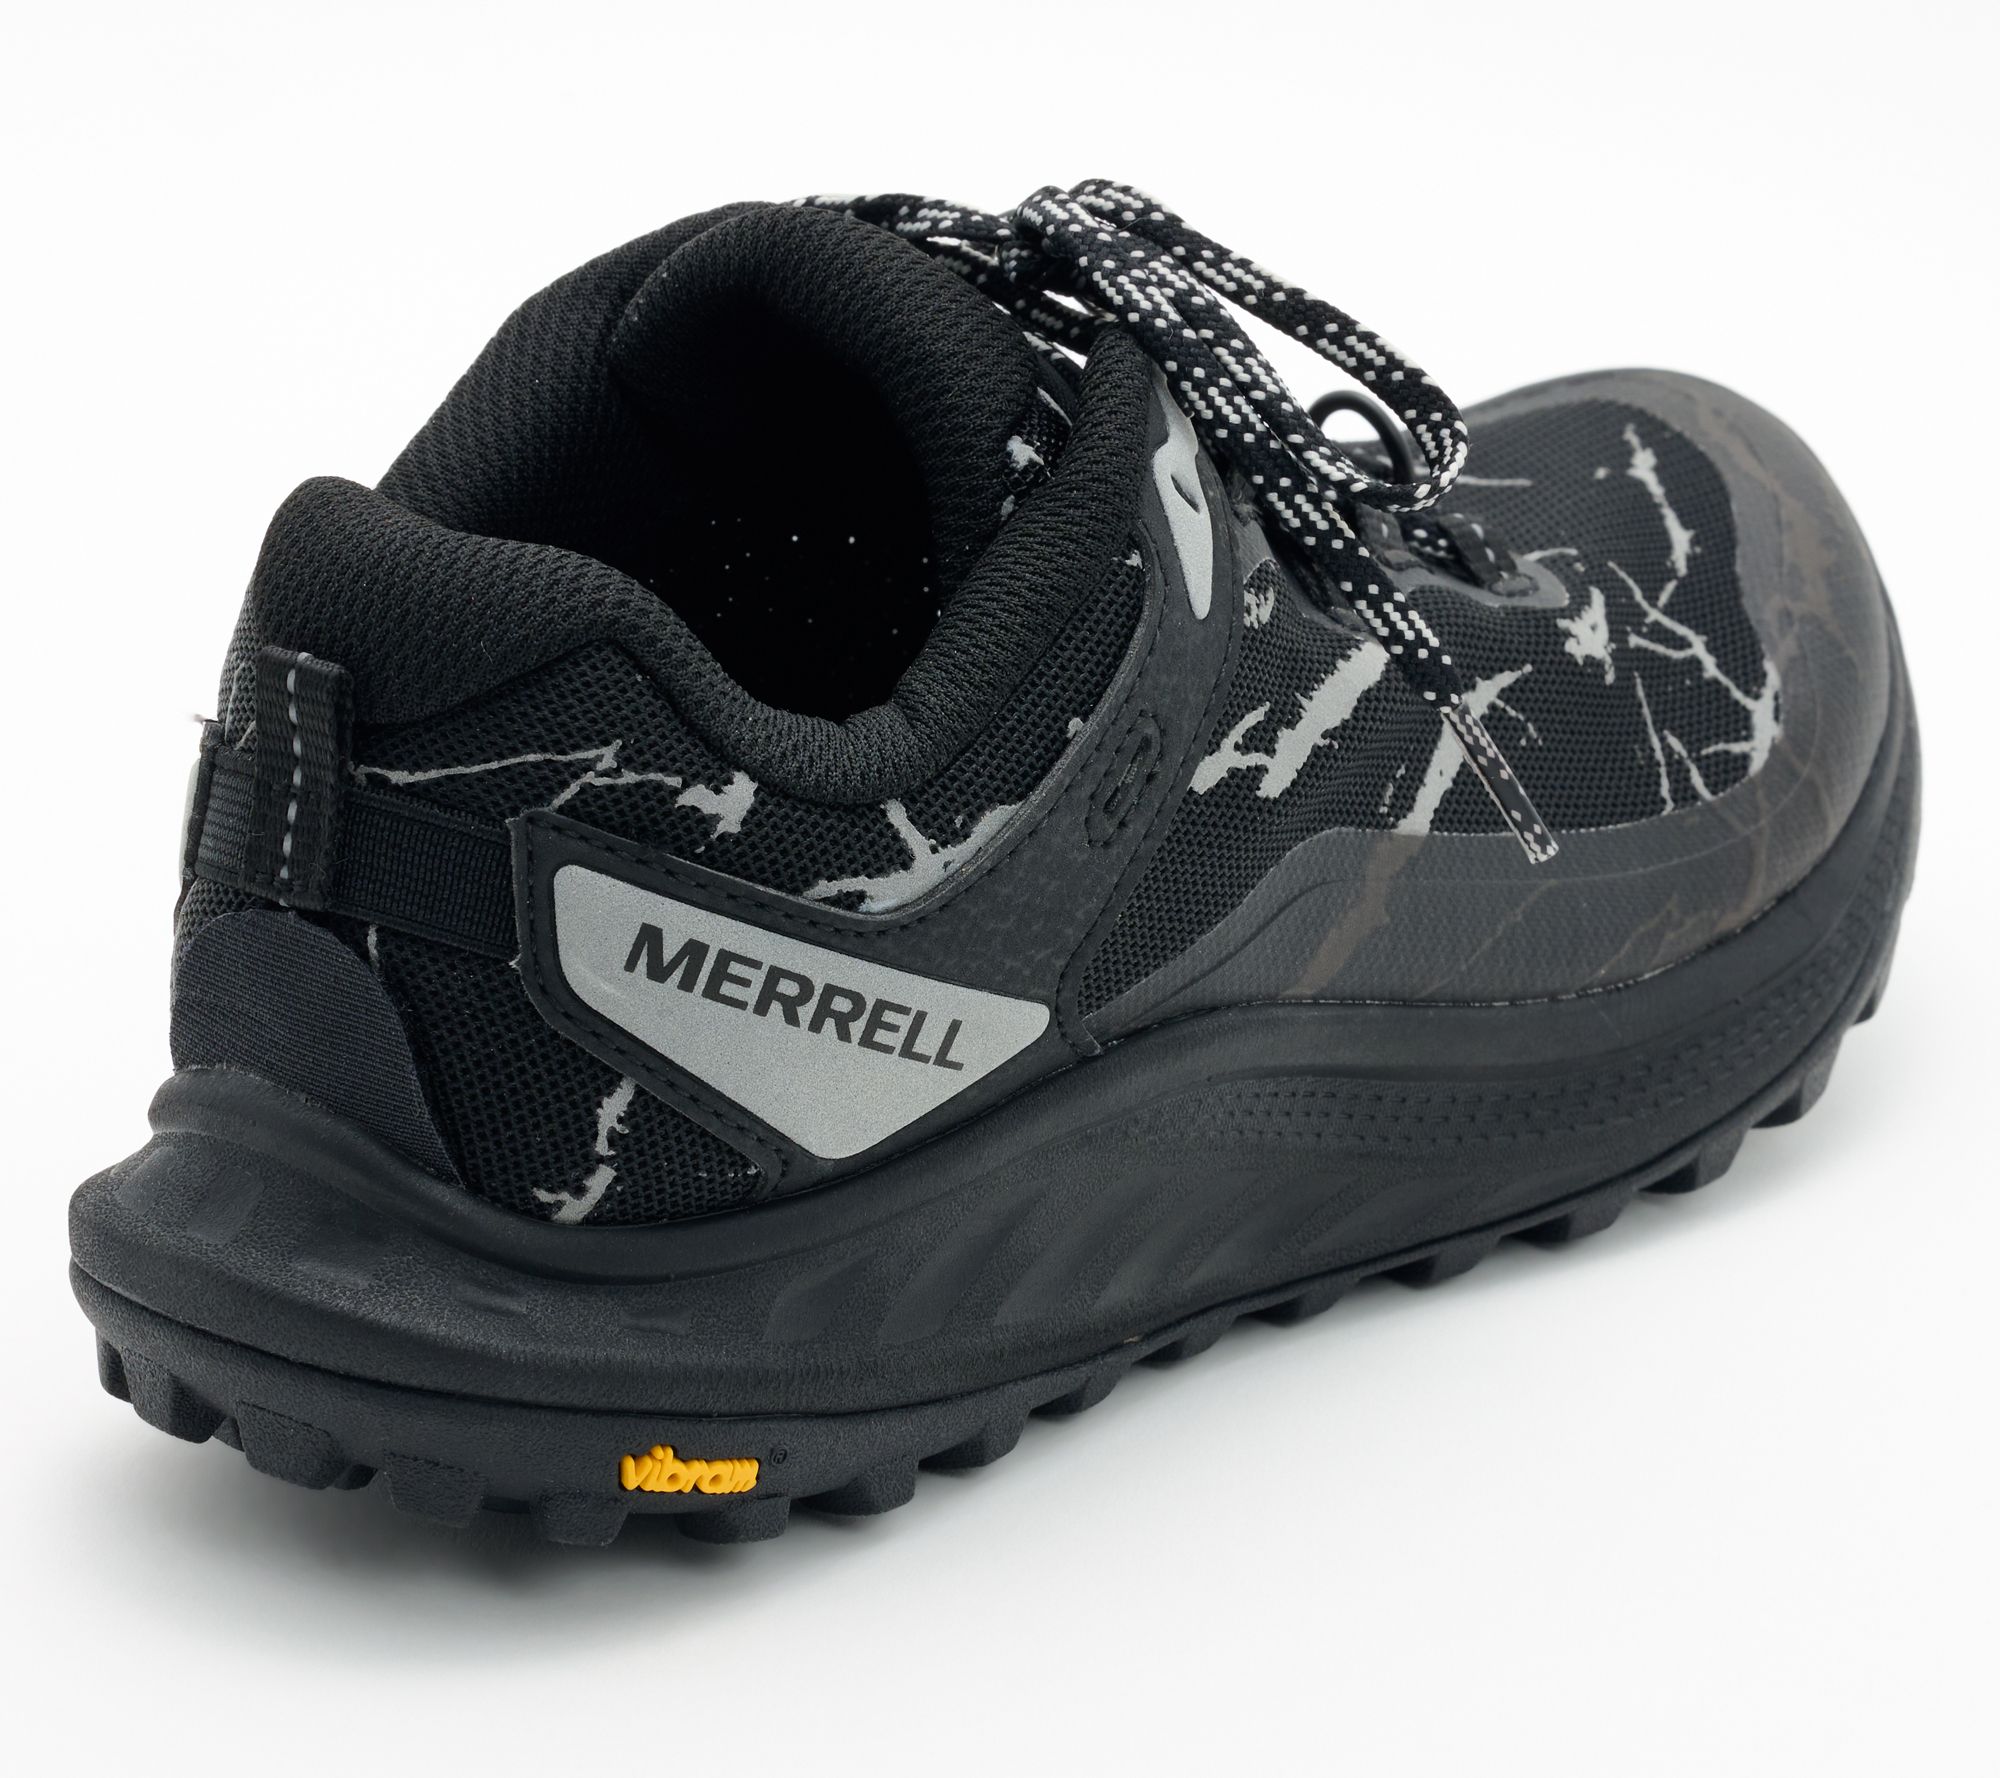 Merrell Lace-Up Trail Running Sneakers - Antora 3 QVC.com